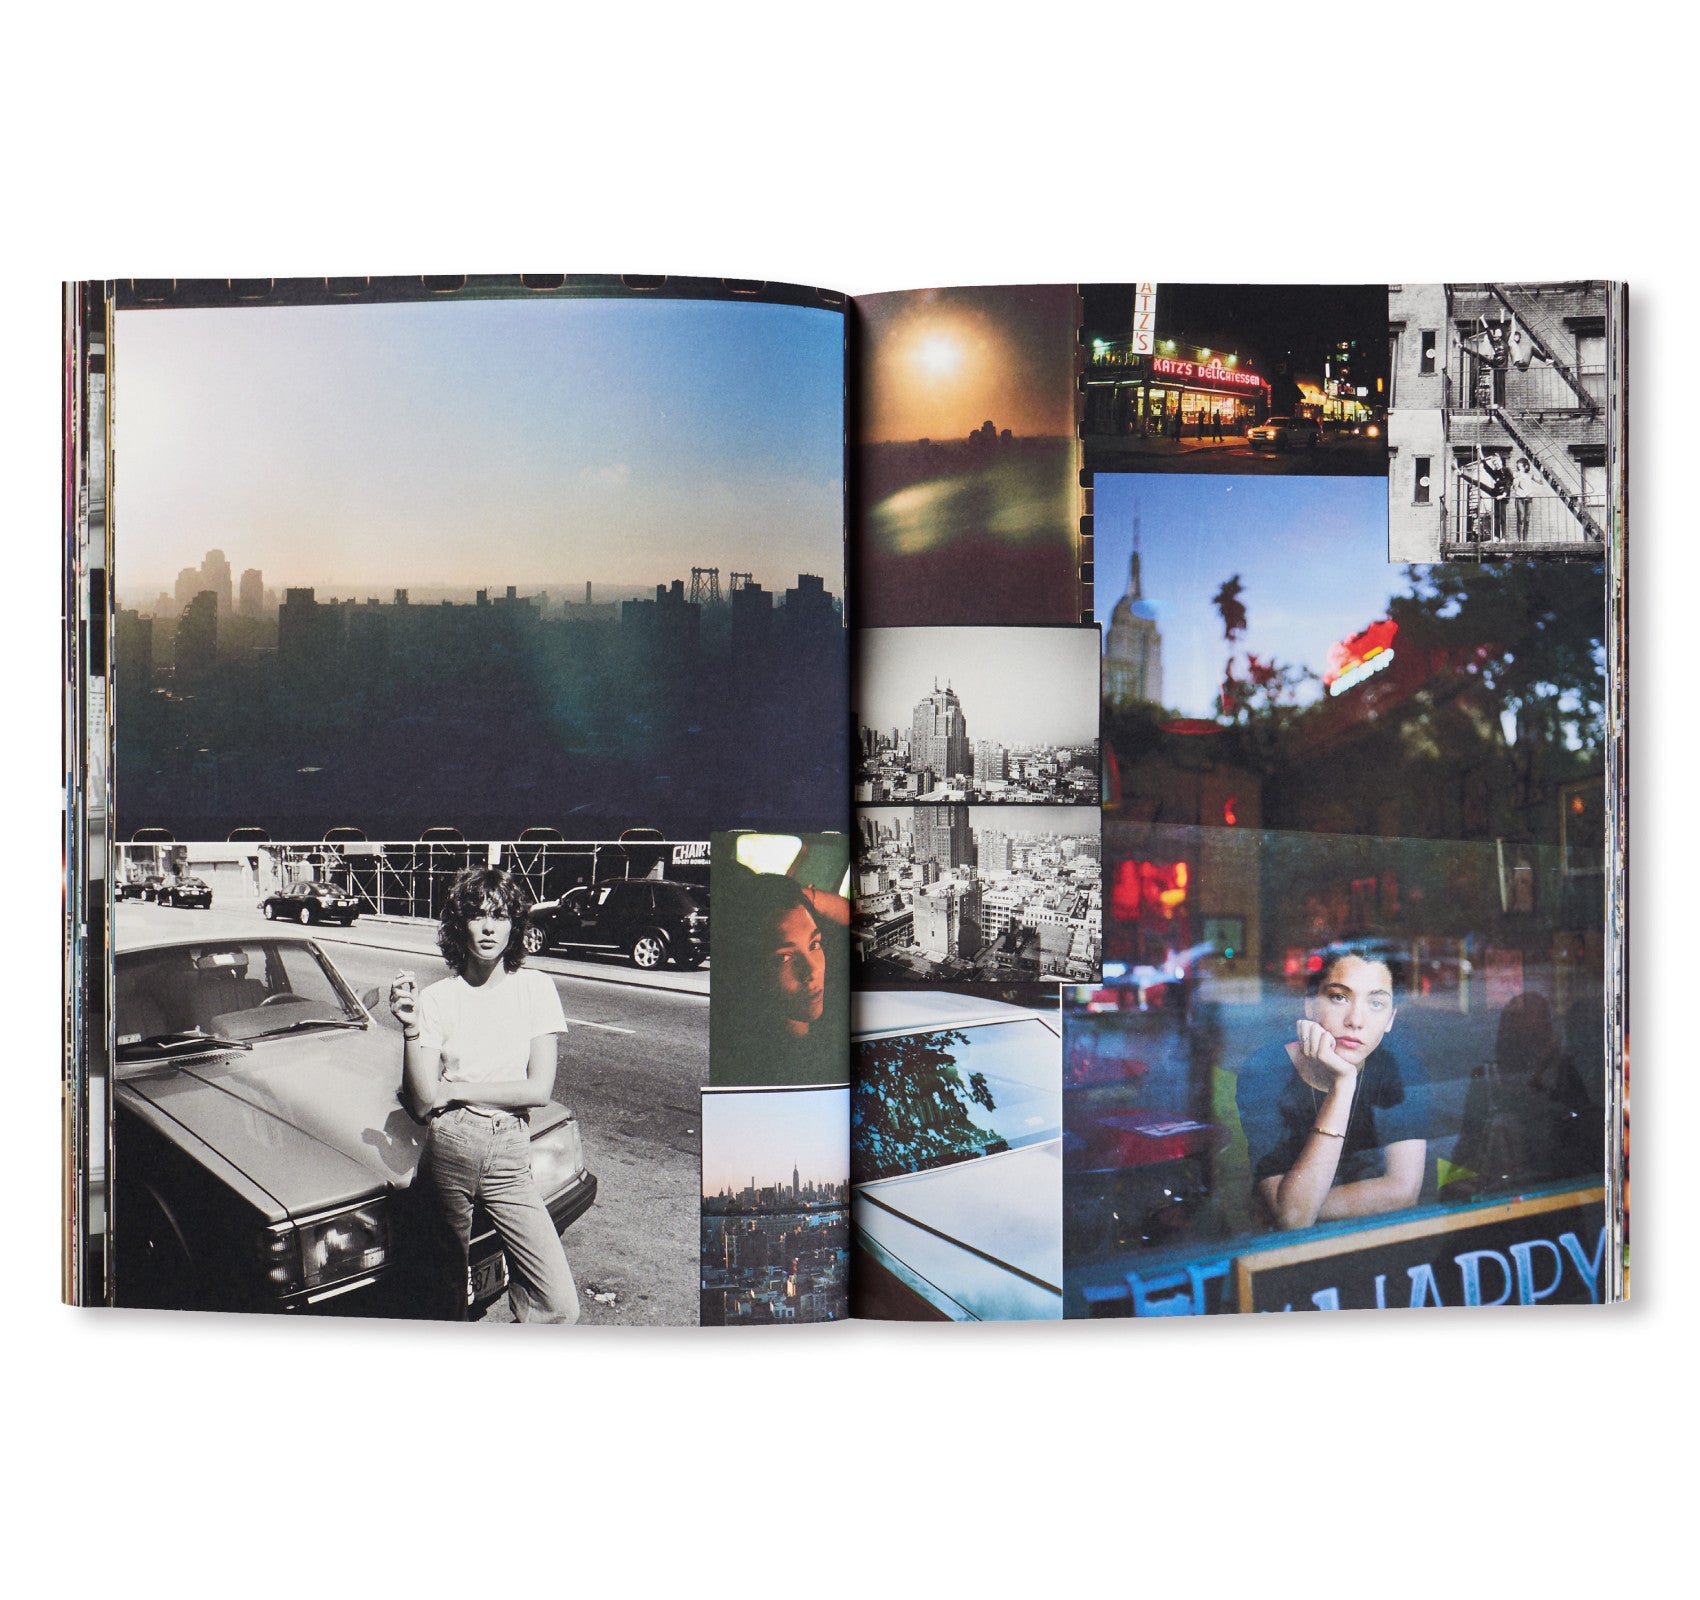 THE OTHER DAY by Quentin de Briey [SPECIAL EDITION]